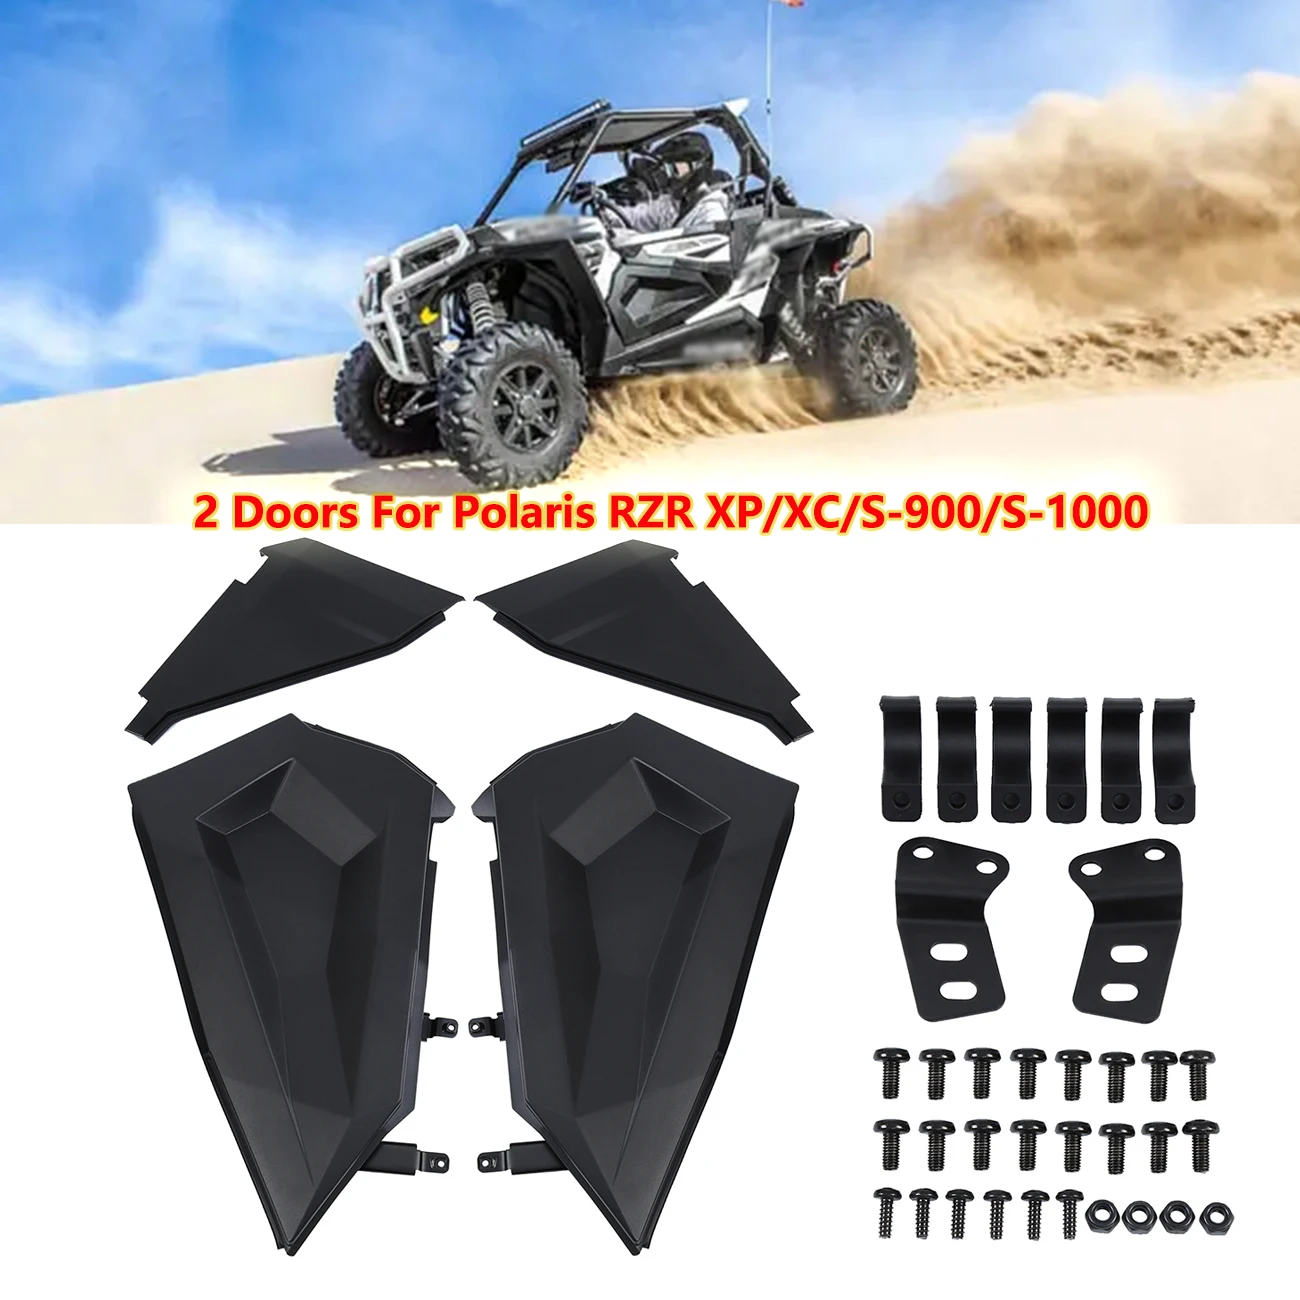 

Samger 2/4 Doors Lower Door Paneling Inserts Kit W/ Metal Frame For Polaris RZR 900 1000 XP S Turbo 2014-2020 Easy To Install